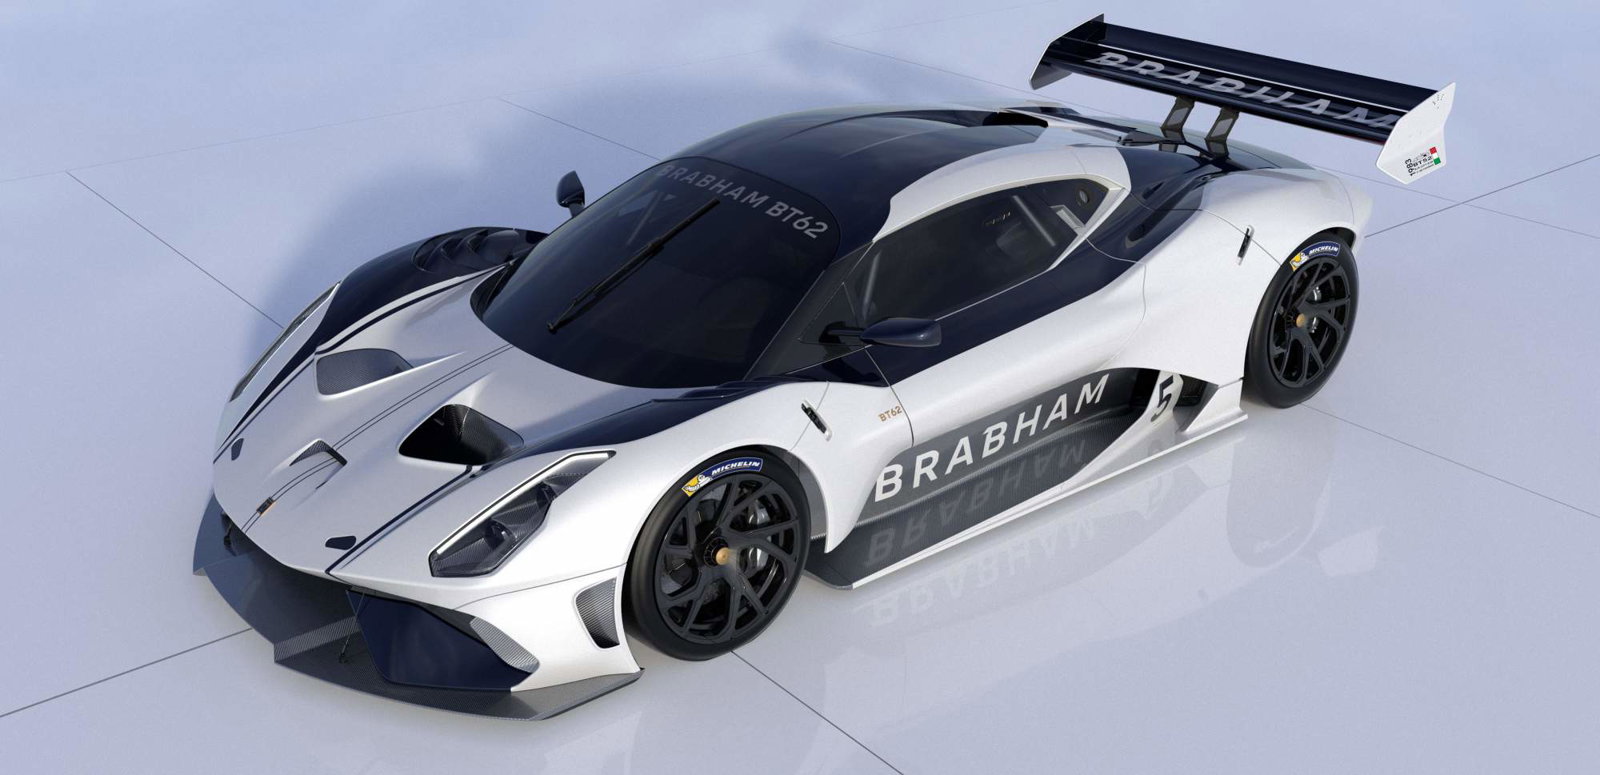 Brabham BT62 supercar tips the scales at 1600kg … of downforce